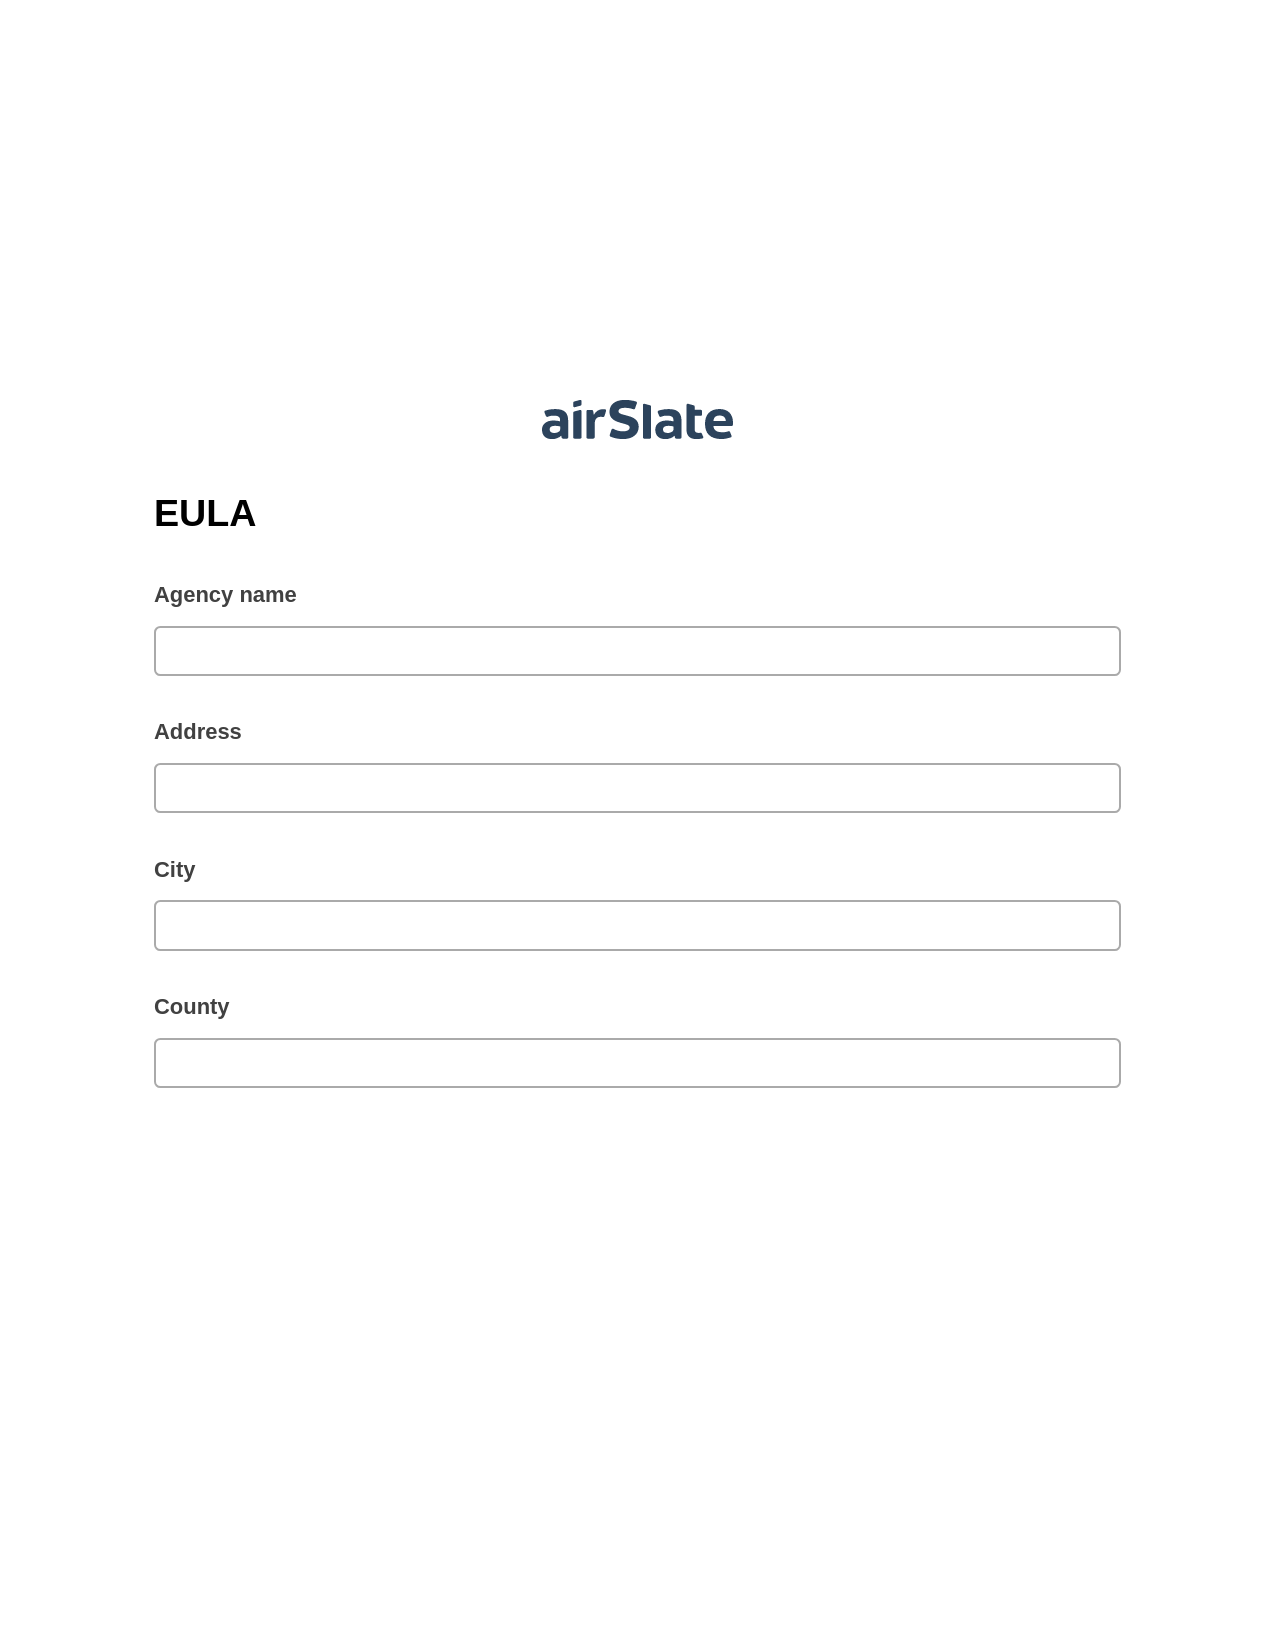 EULA Pre-fill from CSV File Bot, Remove Tags From Slate Bot, Export to NetSuite Record Bot